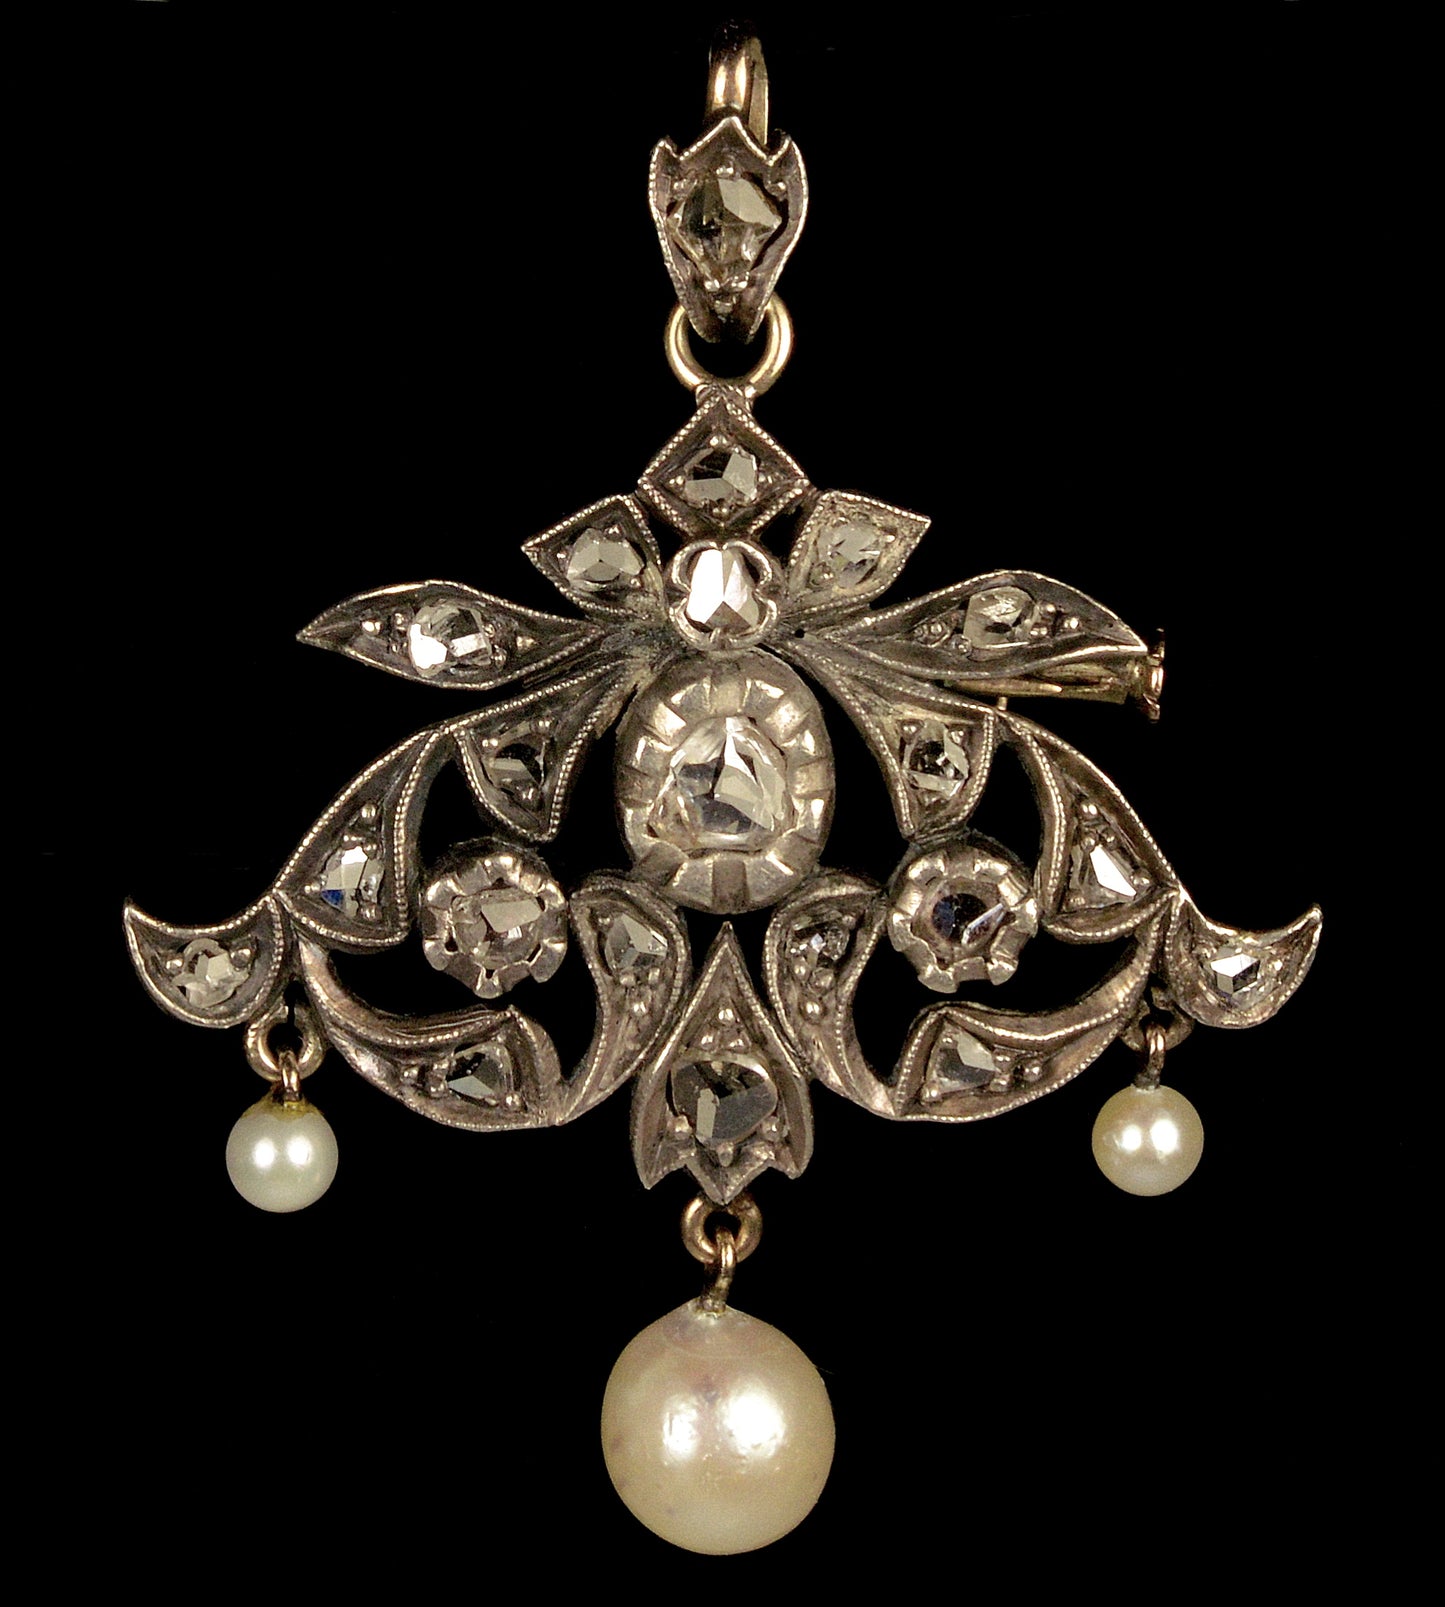 Antique Victorian Belle Epoque 14K Silver Topped Gold Diamond Pearl Pendant Brooch C.1890